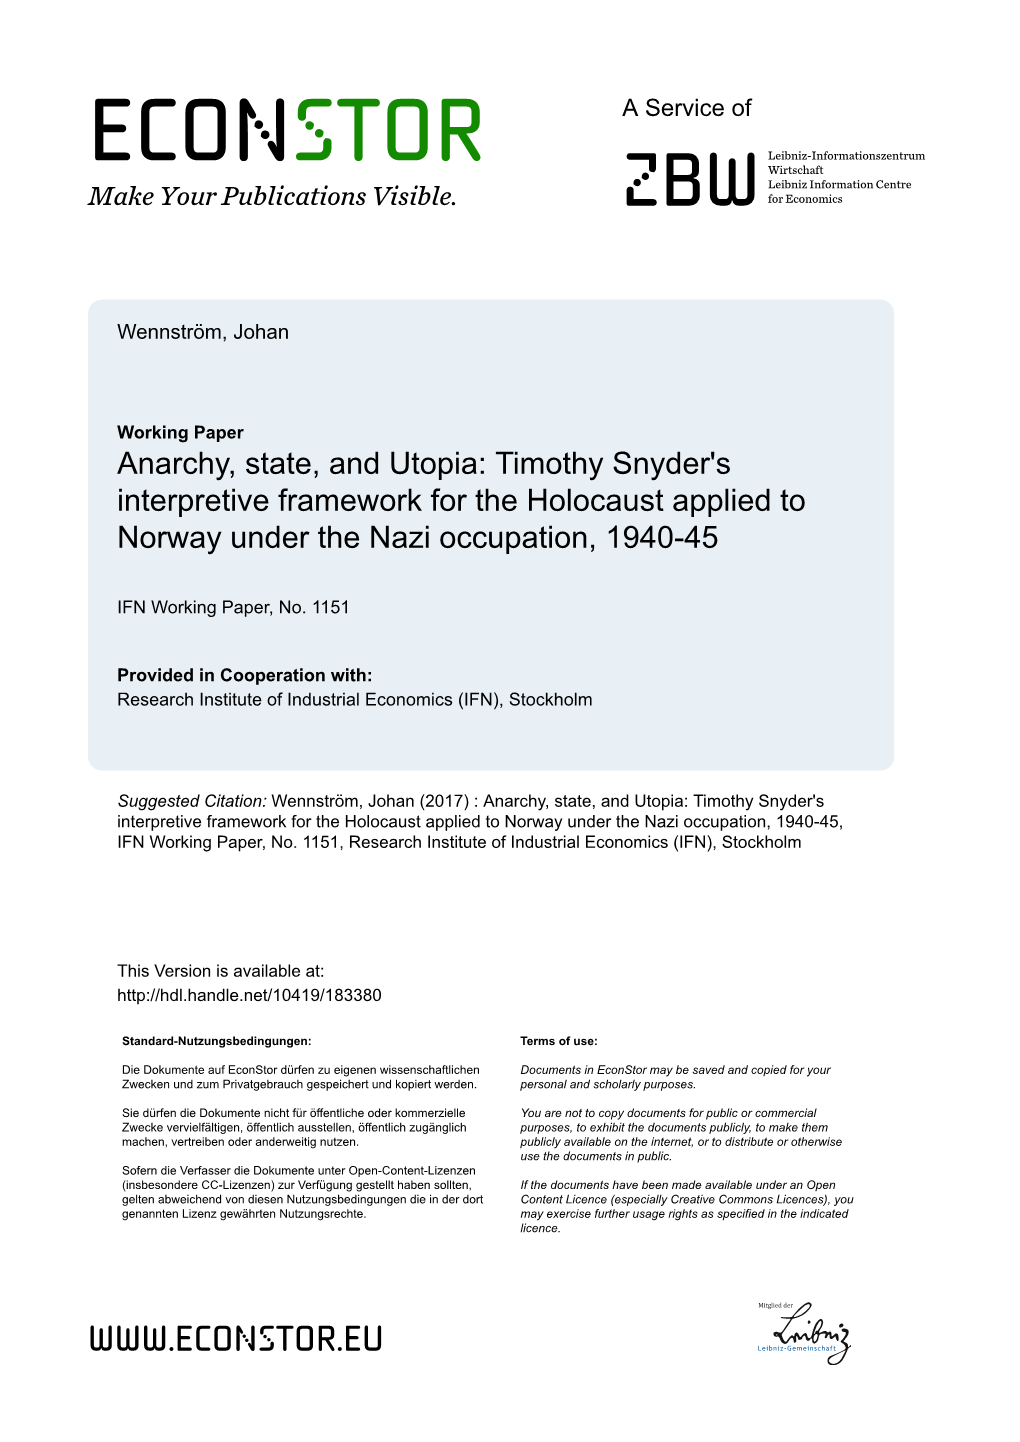 Timothy Snyder's Interpretive Framework for the Holocaust Applied to Norway Under the Nazi Occupation, 1940-45